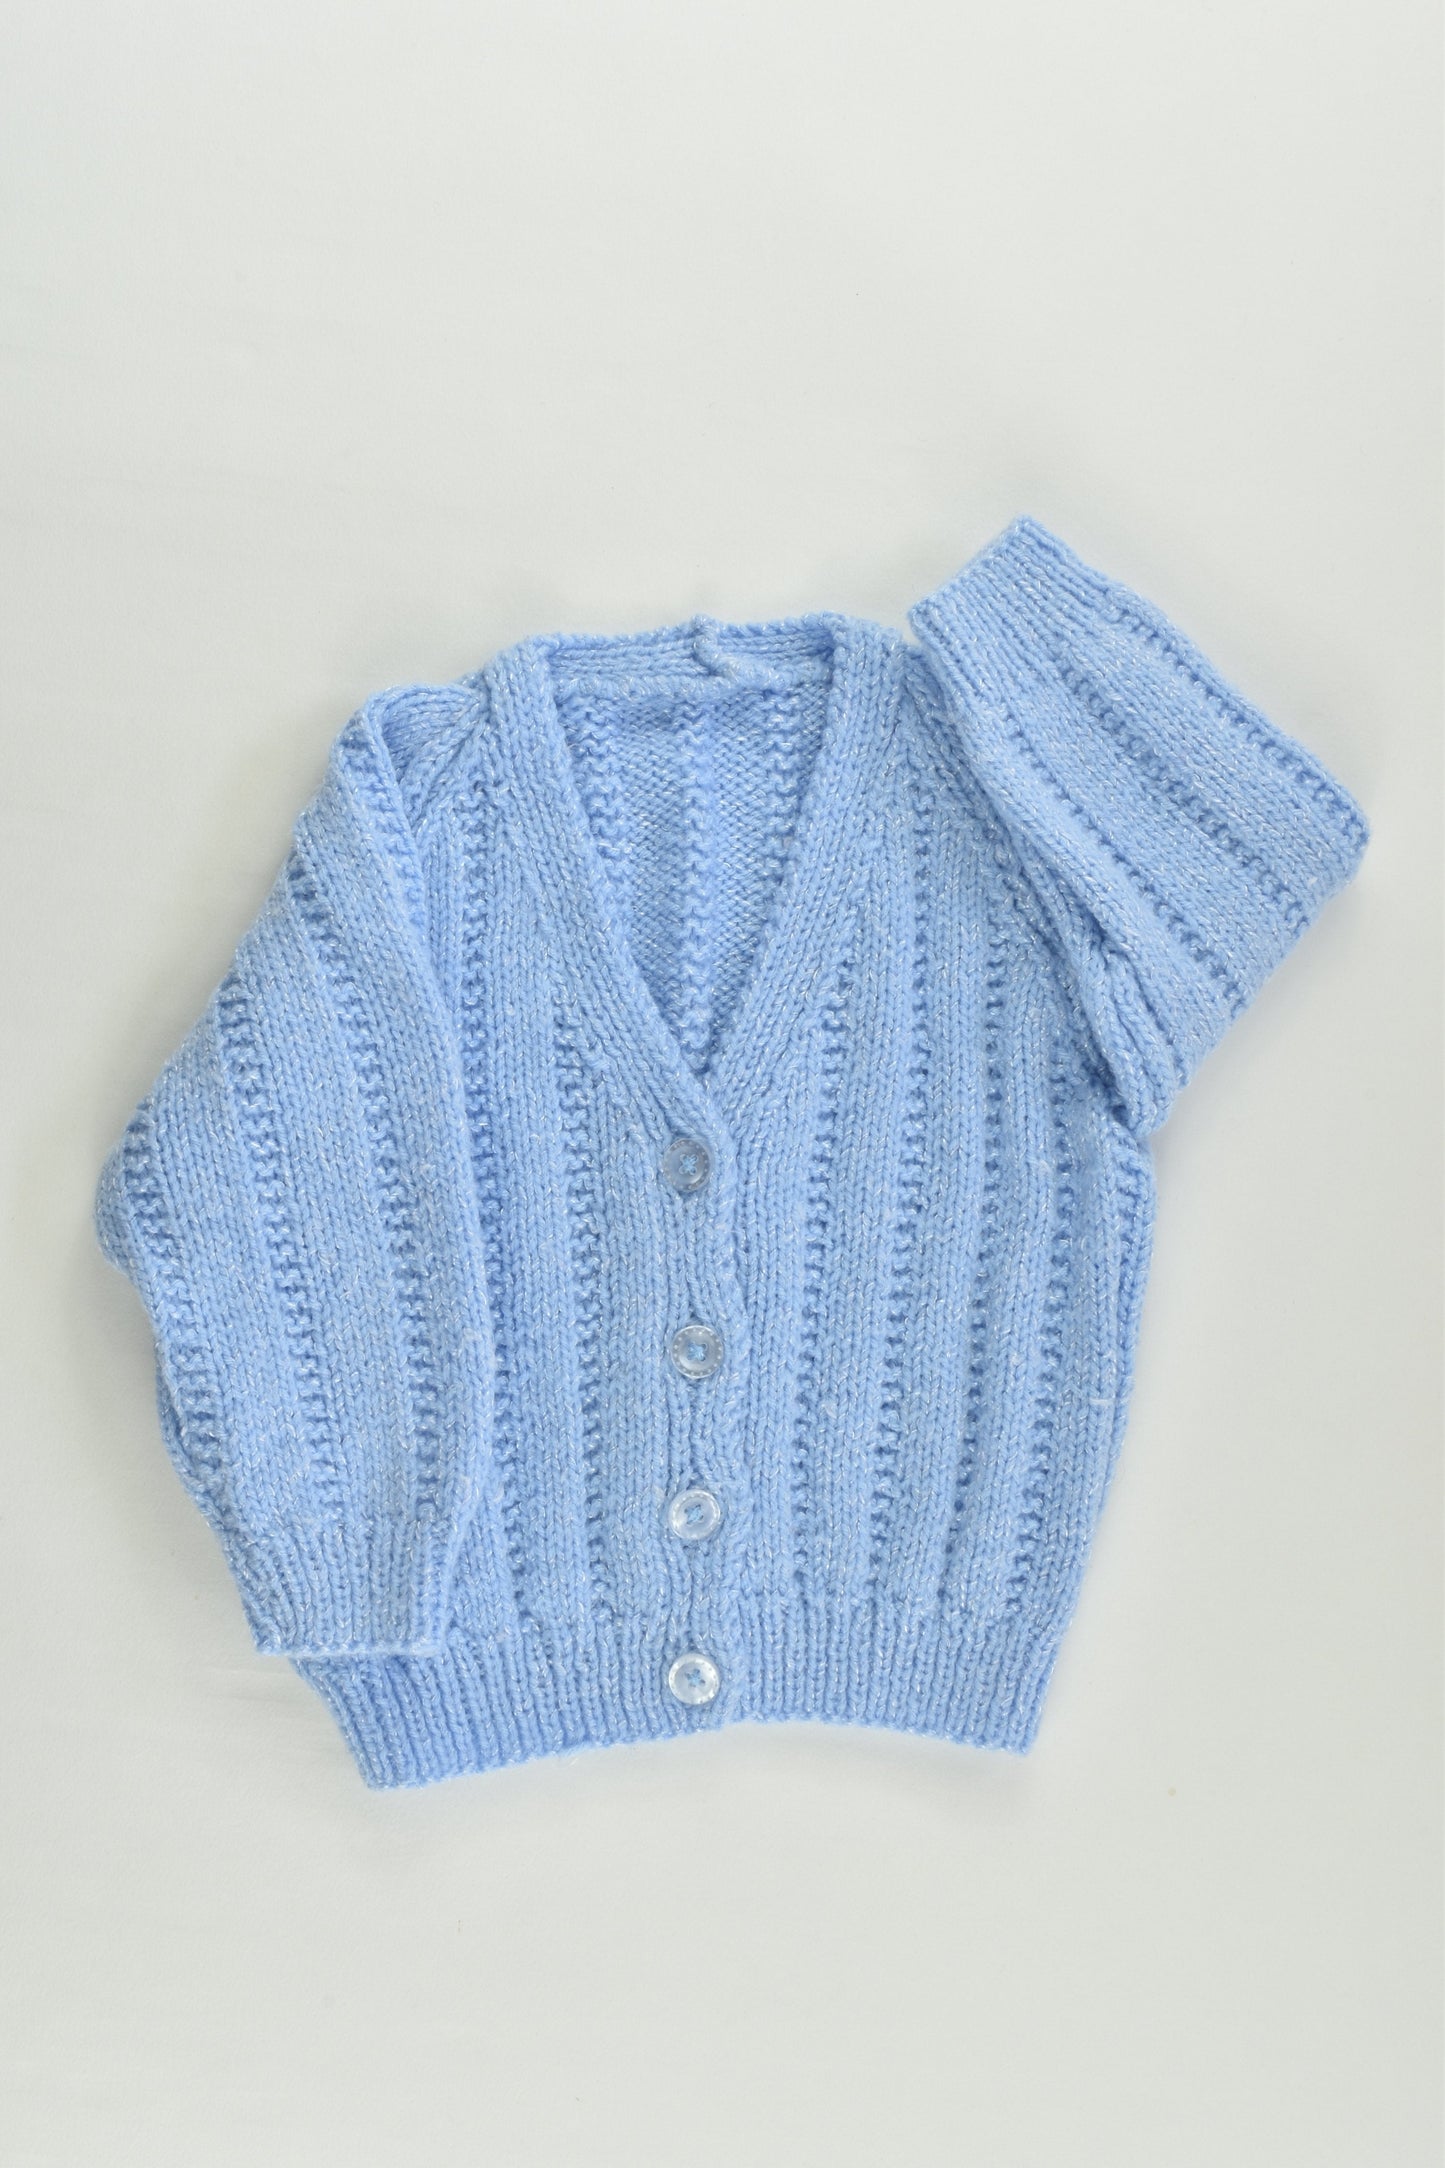 Handmade Size approx 00 Knitted Cardigan